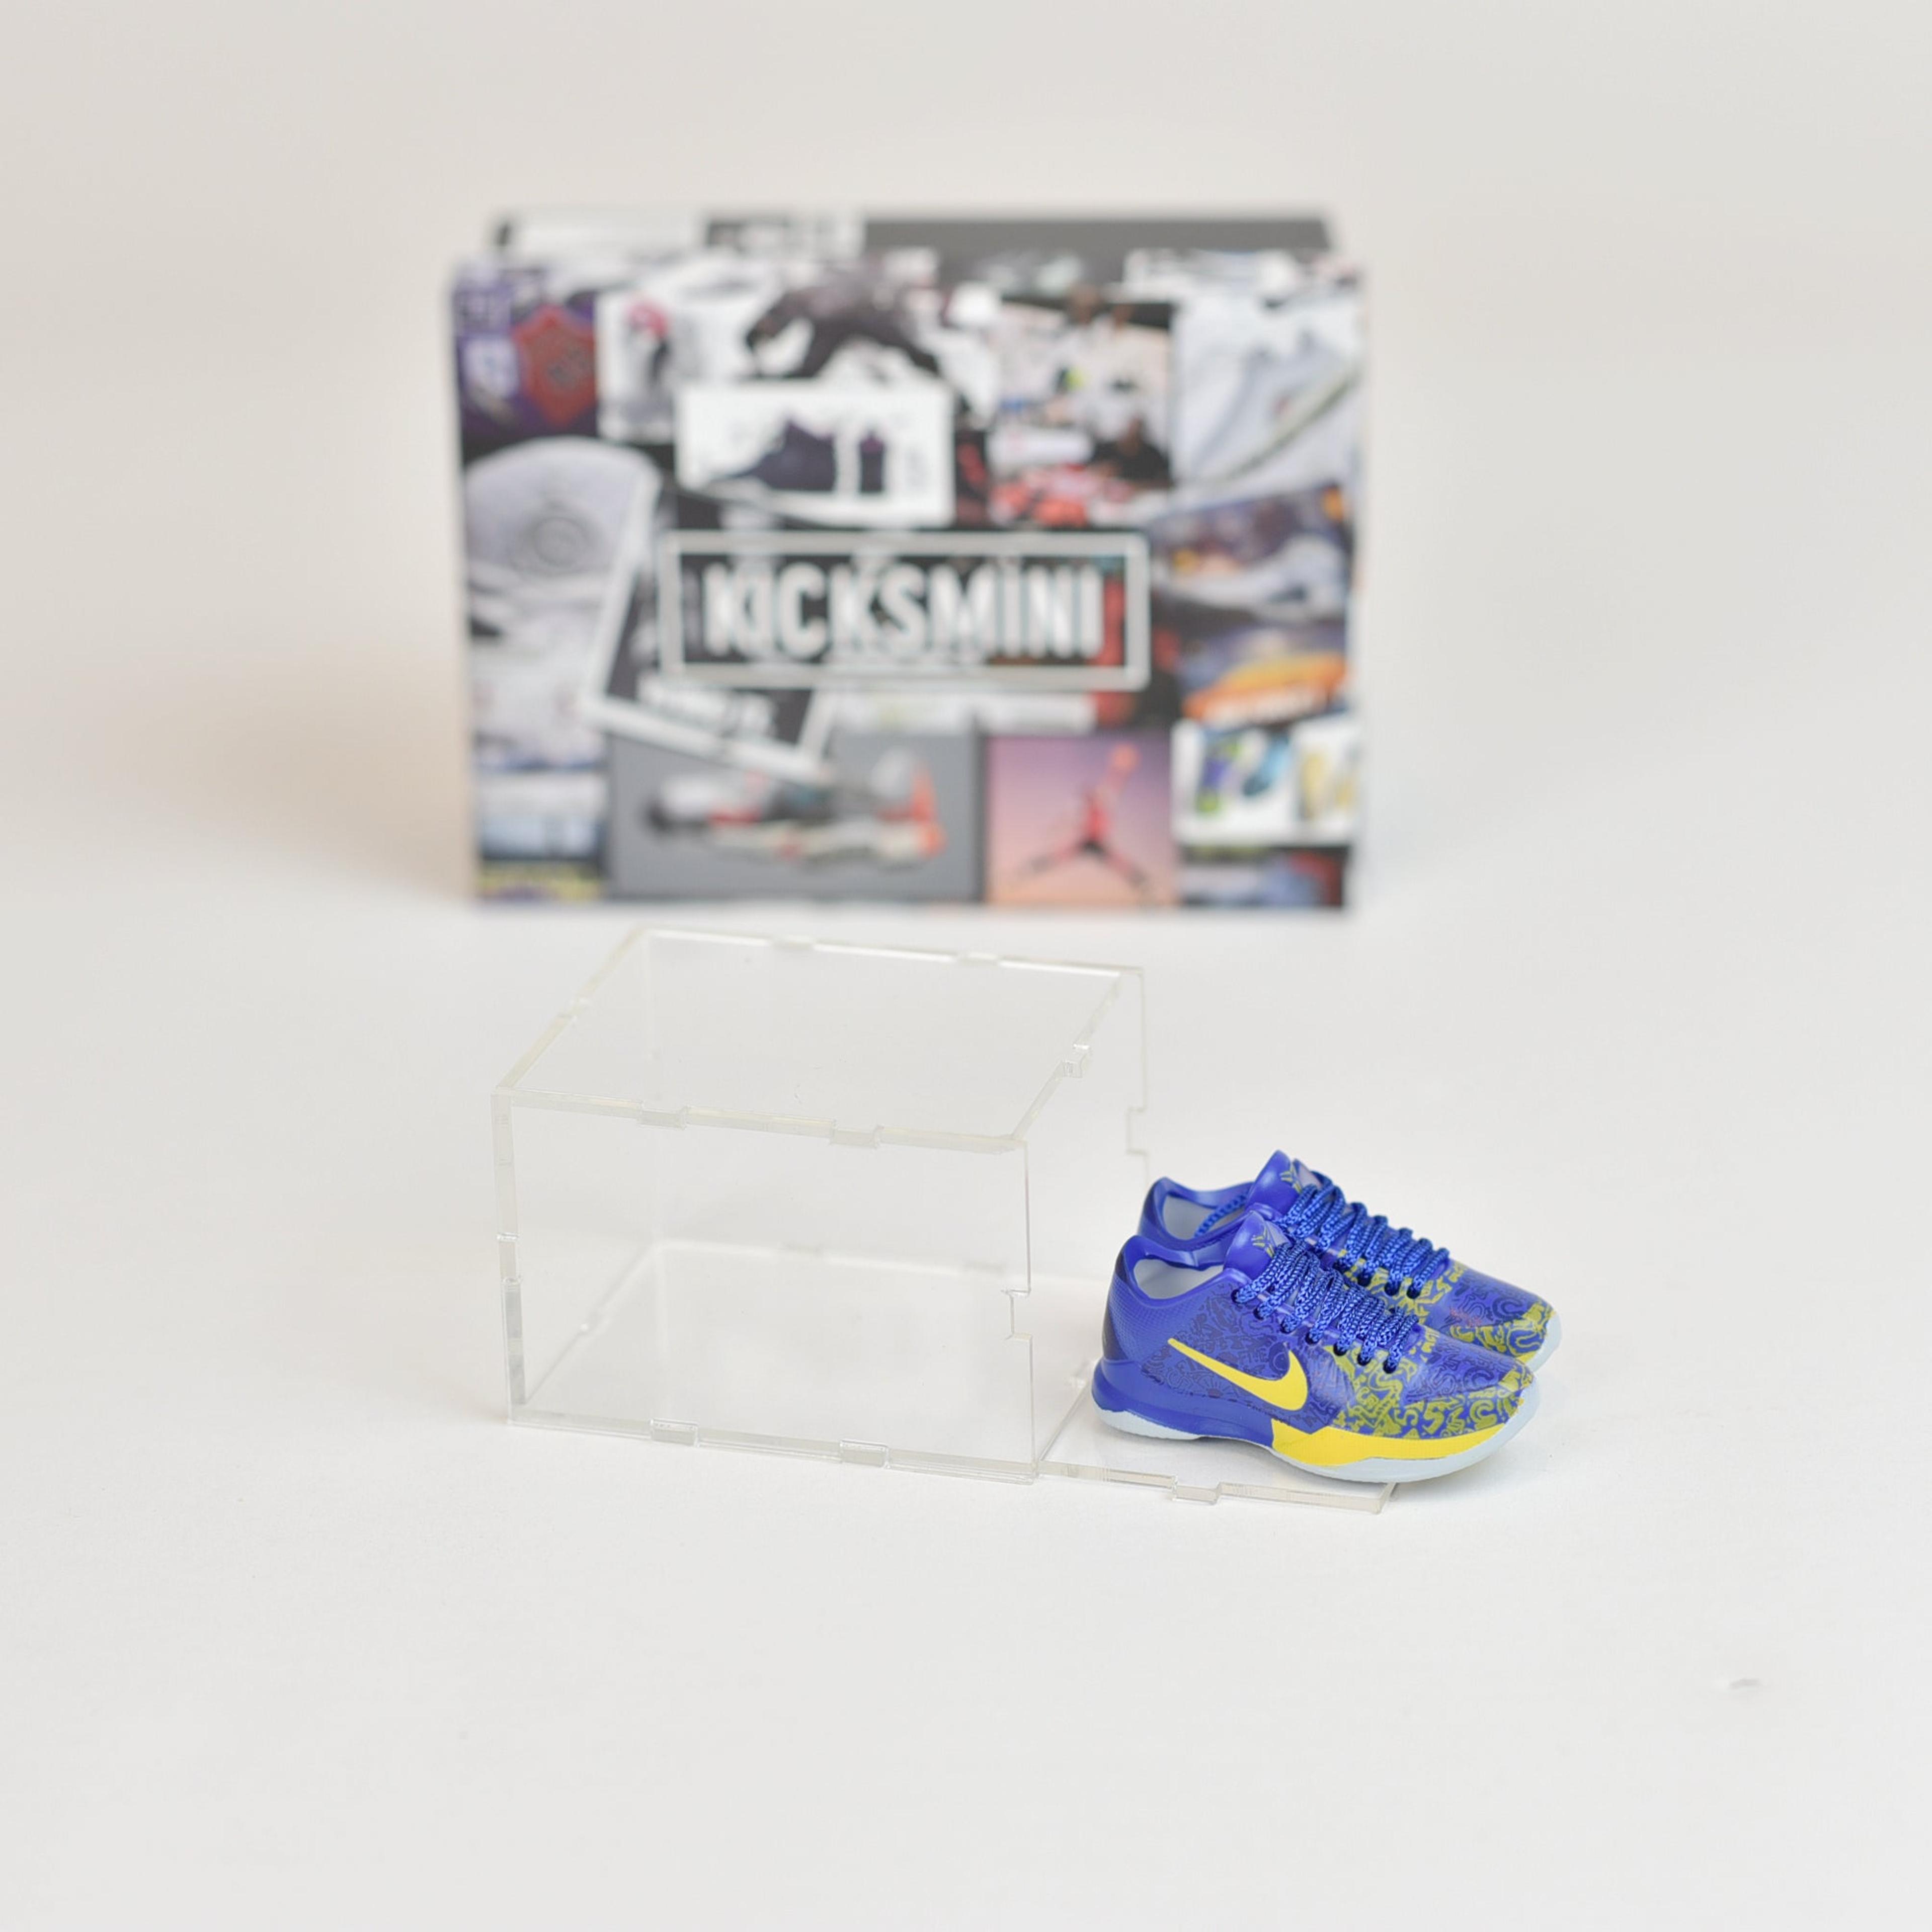 Alternate View 7 of Kobe Bryant/LeBron James/Steph Curry Mini Sneaker Collection wit